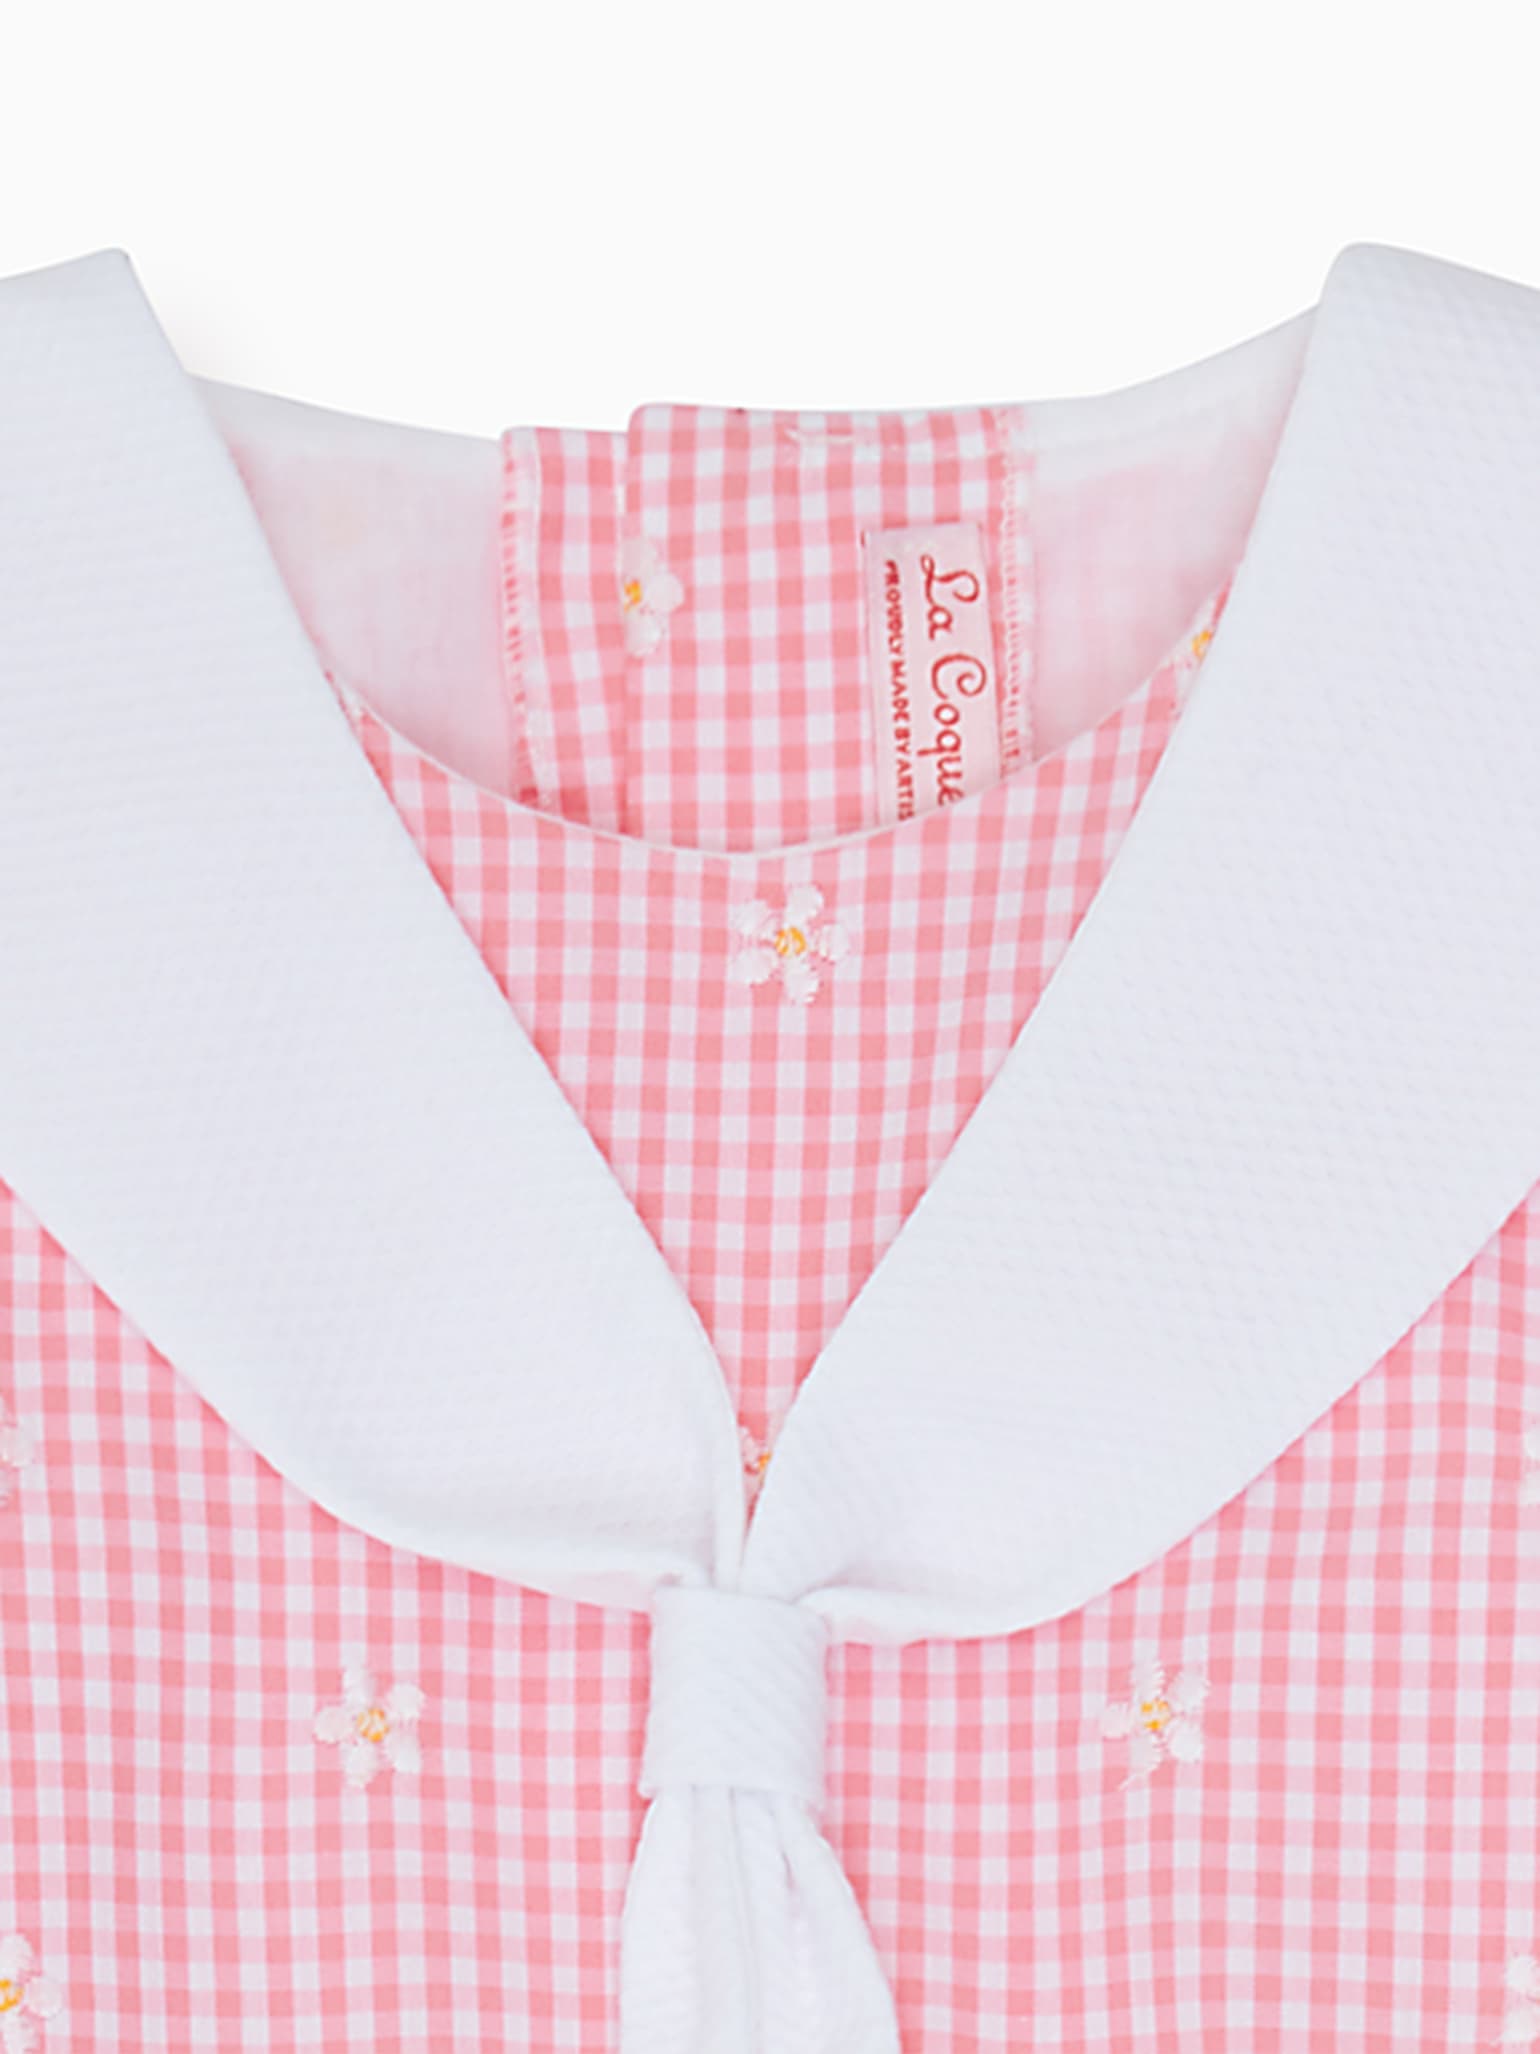 Pink Gingham Amelia Girl Embroidered Dress